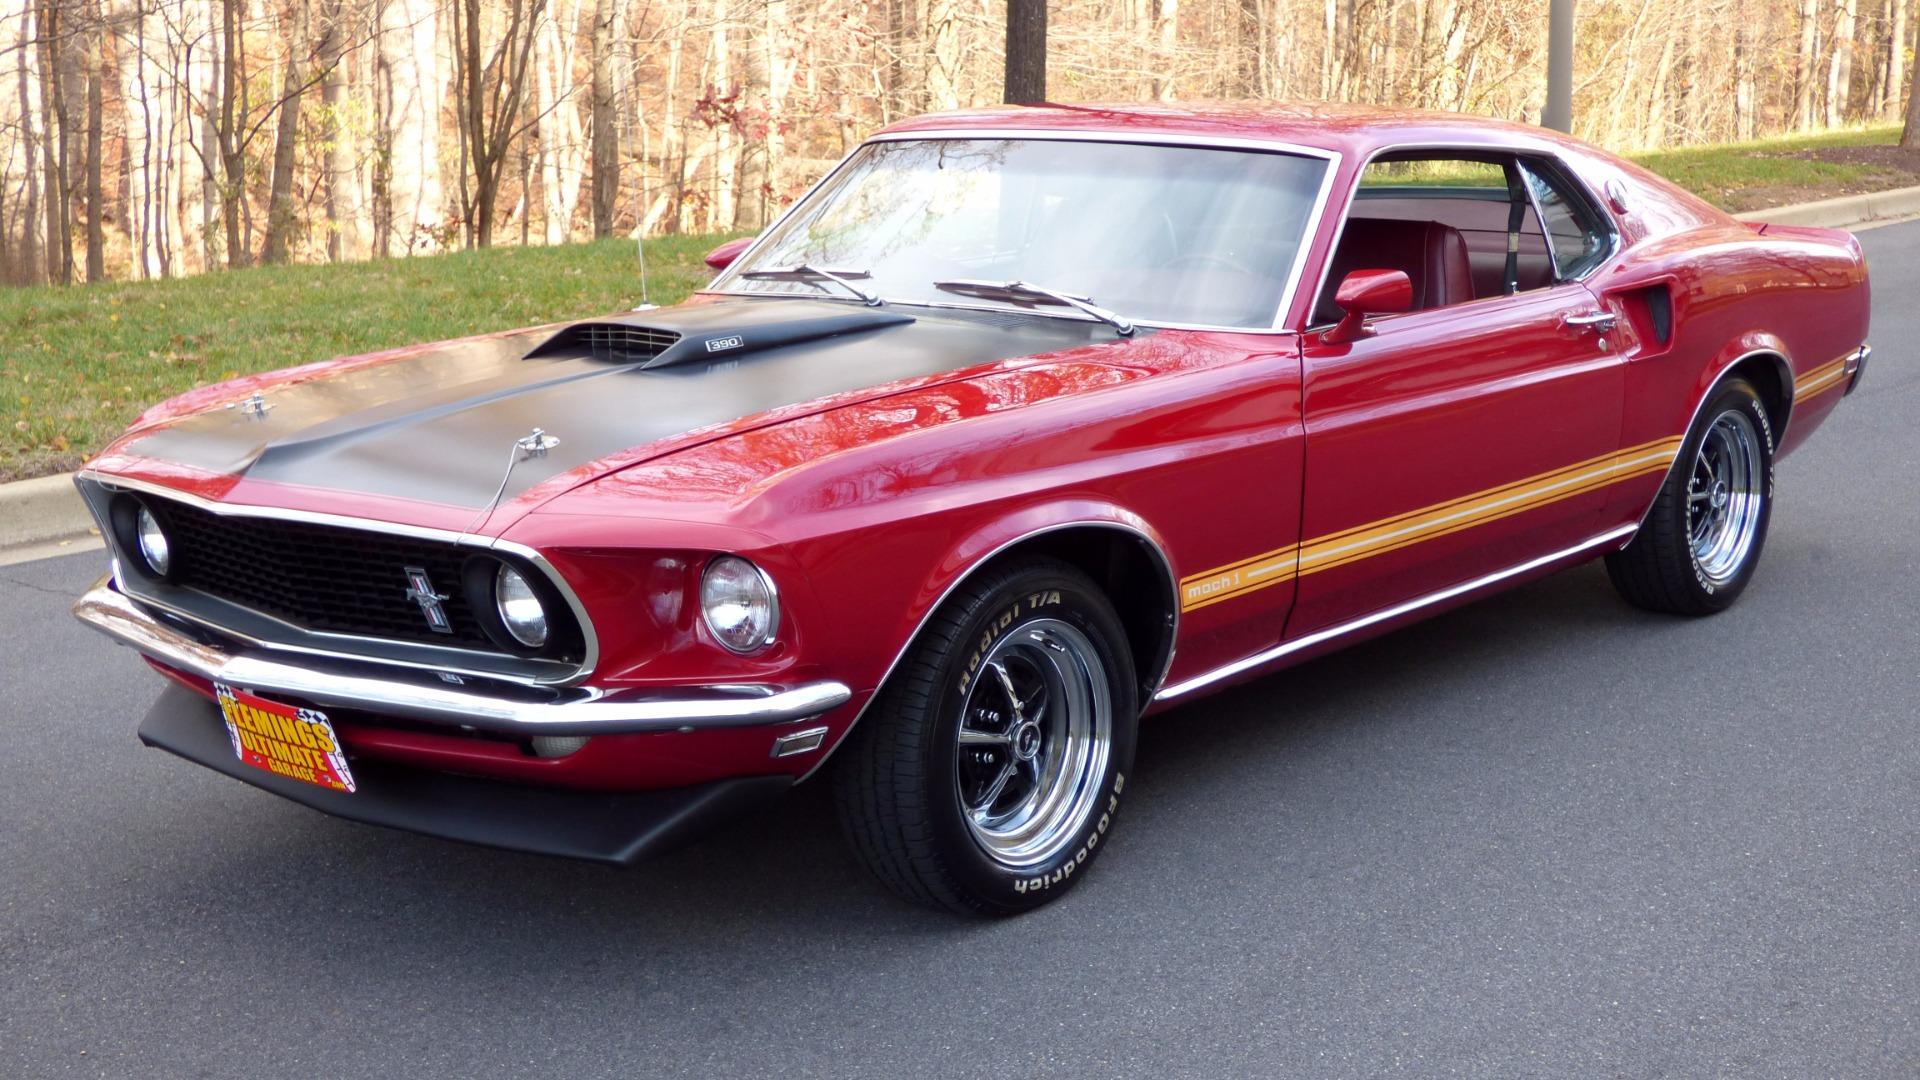 Car Fastback Ford Mustang Mach 1 Muscle Car Red Car 1920x1080